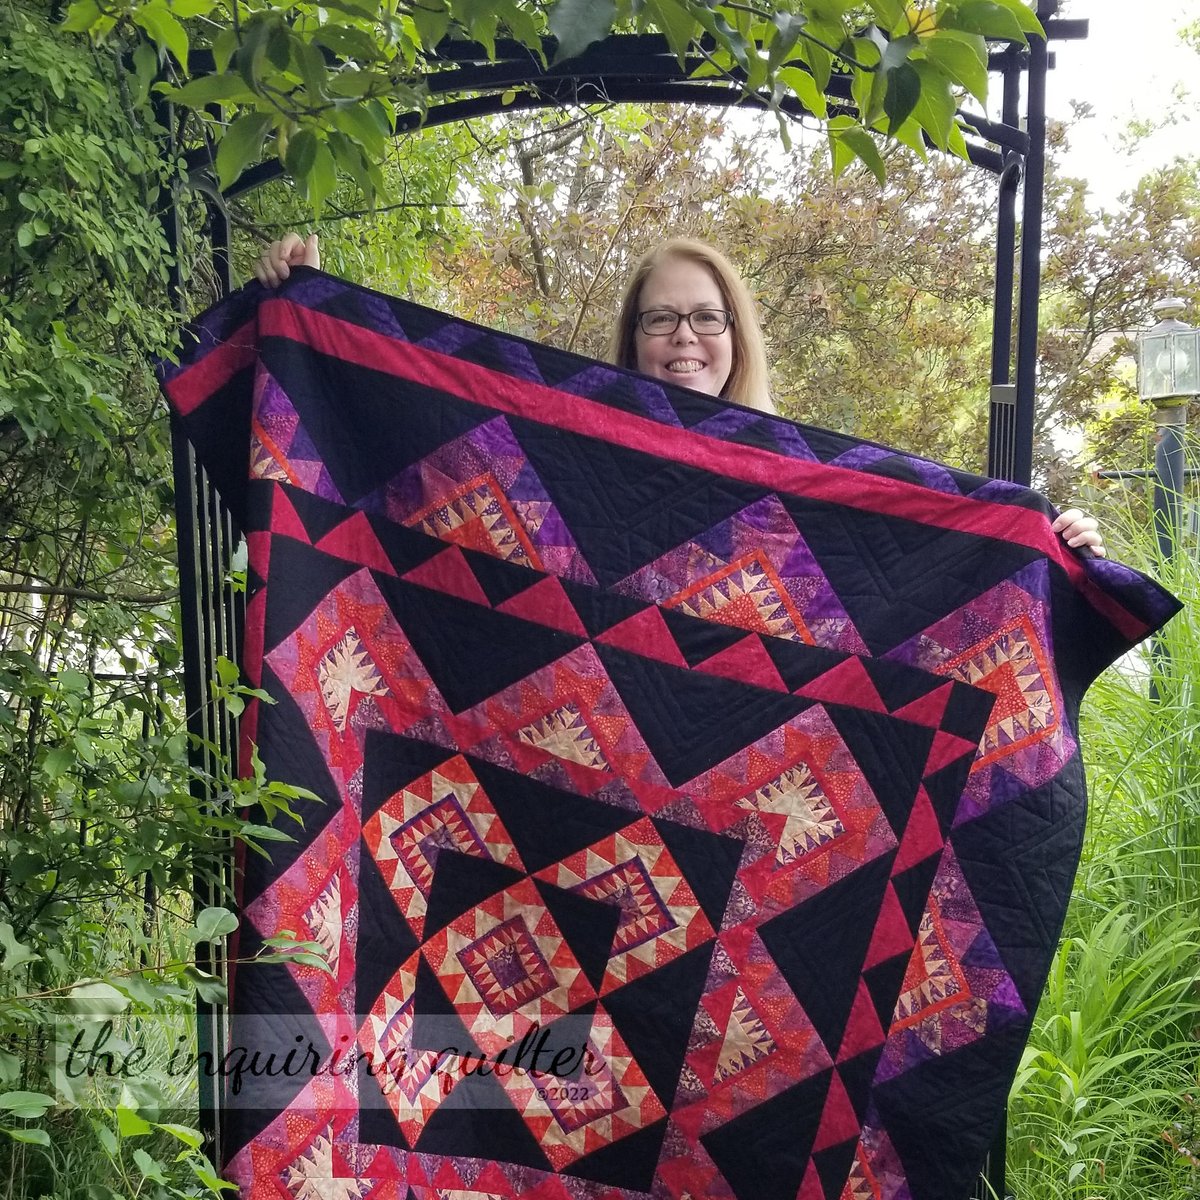 It's my day on the Island Batik New York Beauty blog hop! Come see the quilt I created using the new Nightshade collection. Be sure to enter my giveaway!

inquiringquilter.com/questions/2022…

#inquiringquilter #islandbatikambassador @islandbatik #islandbatik #newyorkbeautybloghop